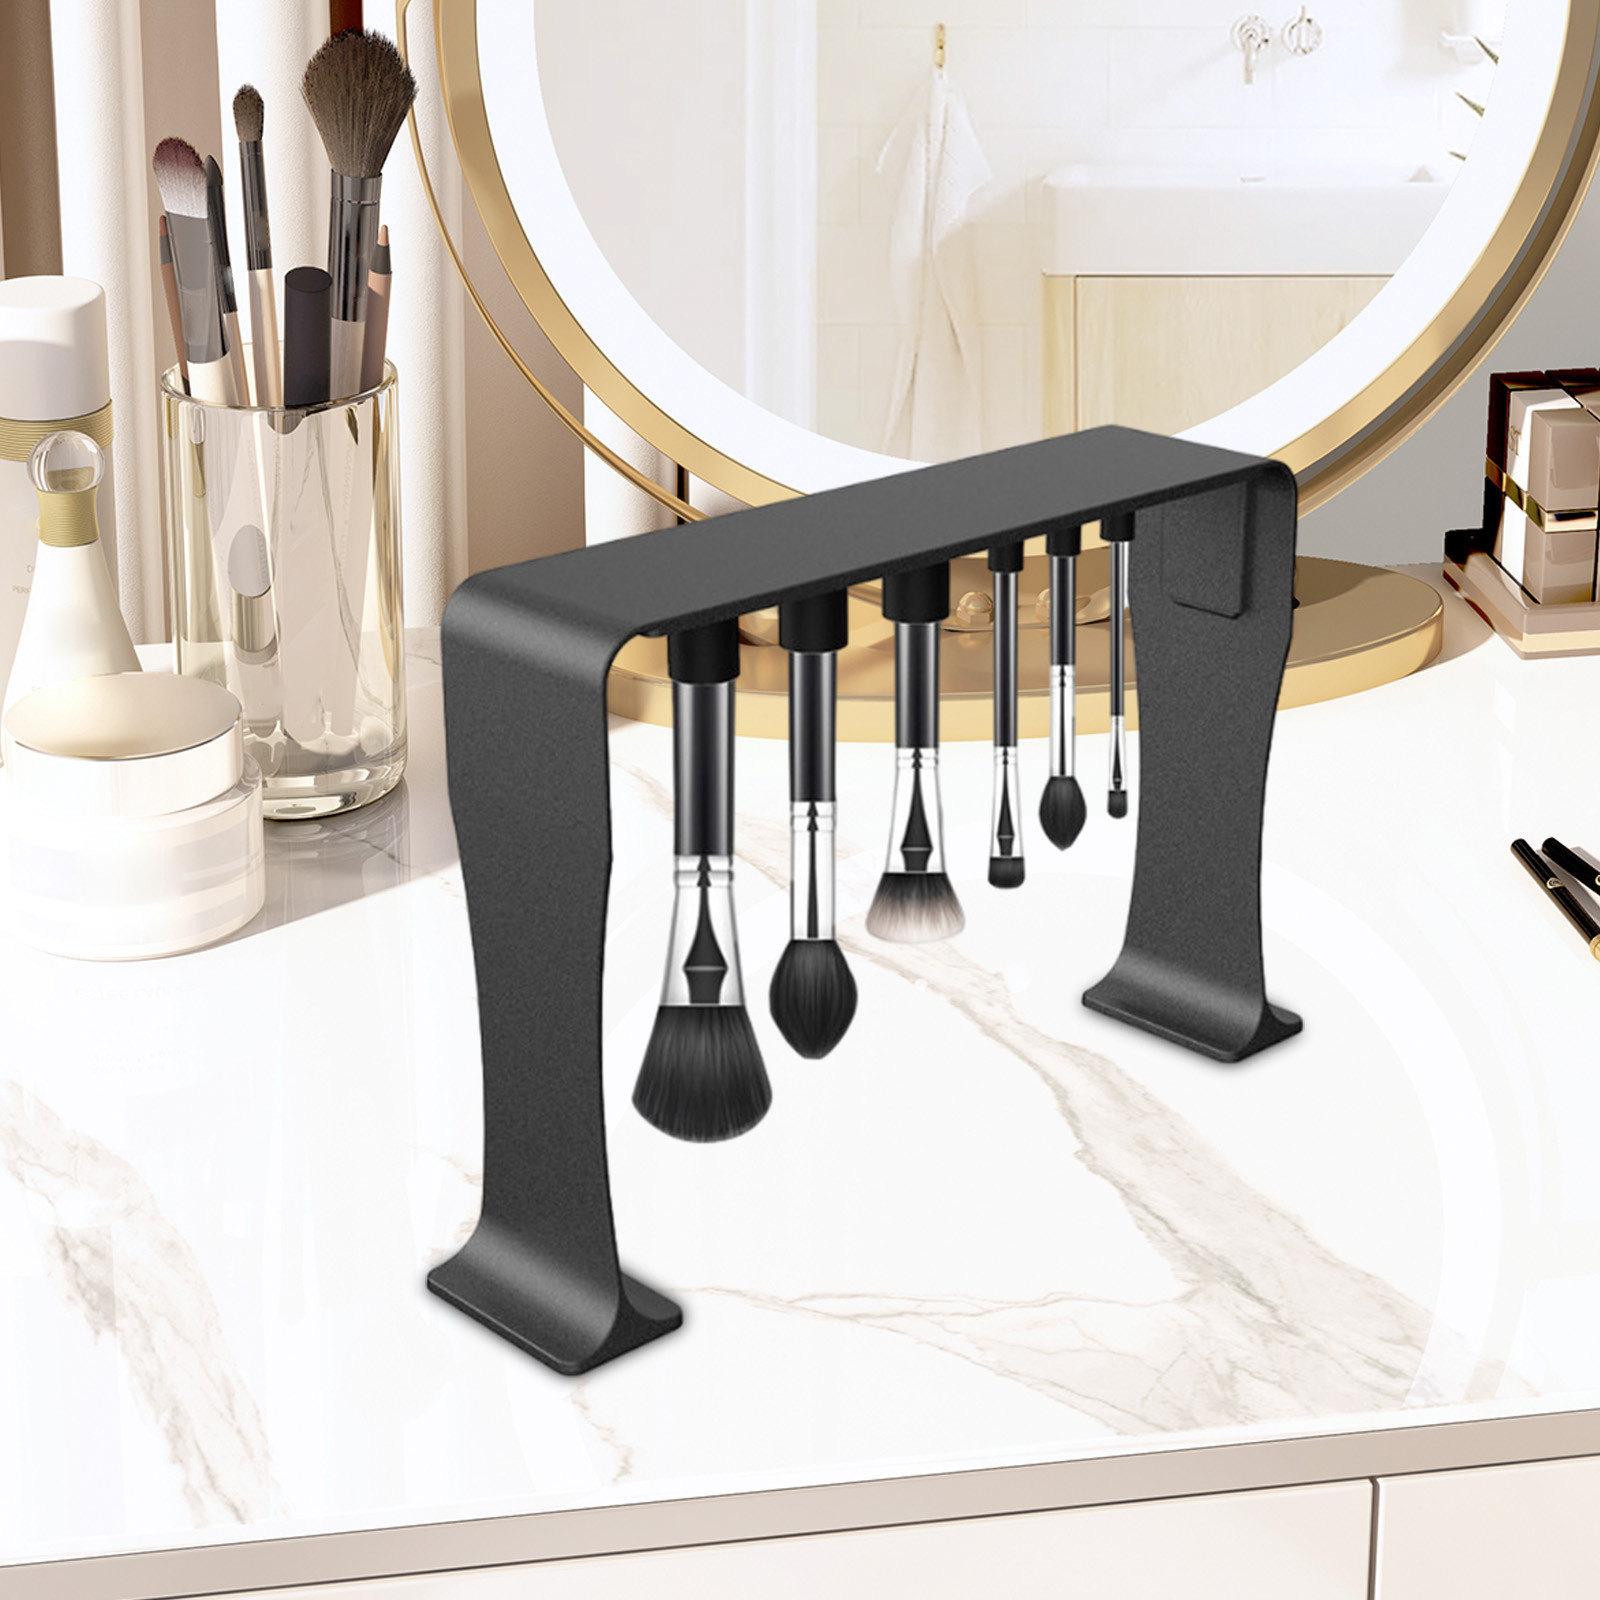 Jikolililili Makeup Brush Drying Rack, Magnetic Hanging, Makeup Brush Dryer Stand , for Storing and Drying Various Sizes and Types of Brushes - Black